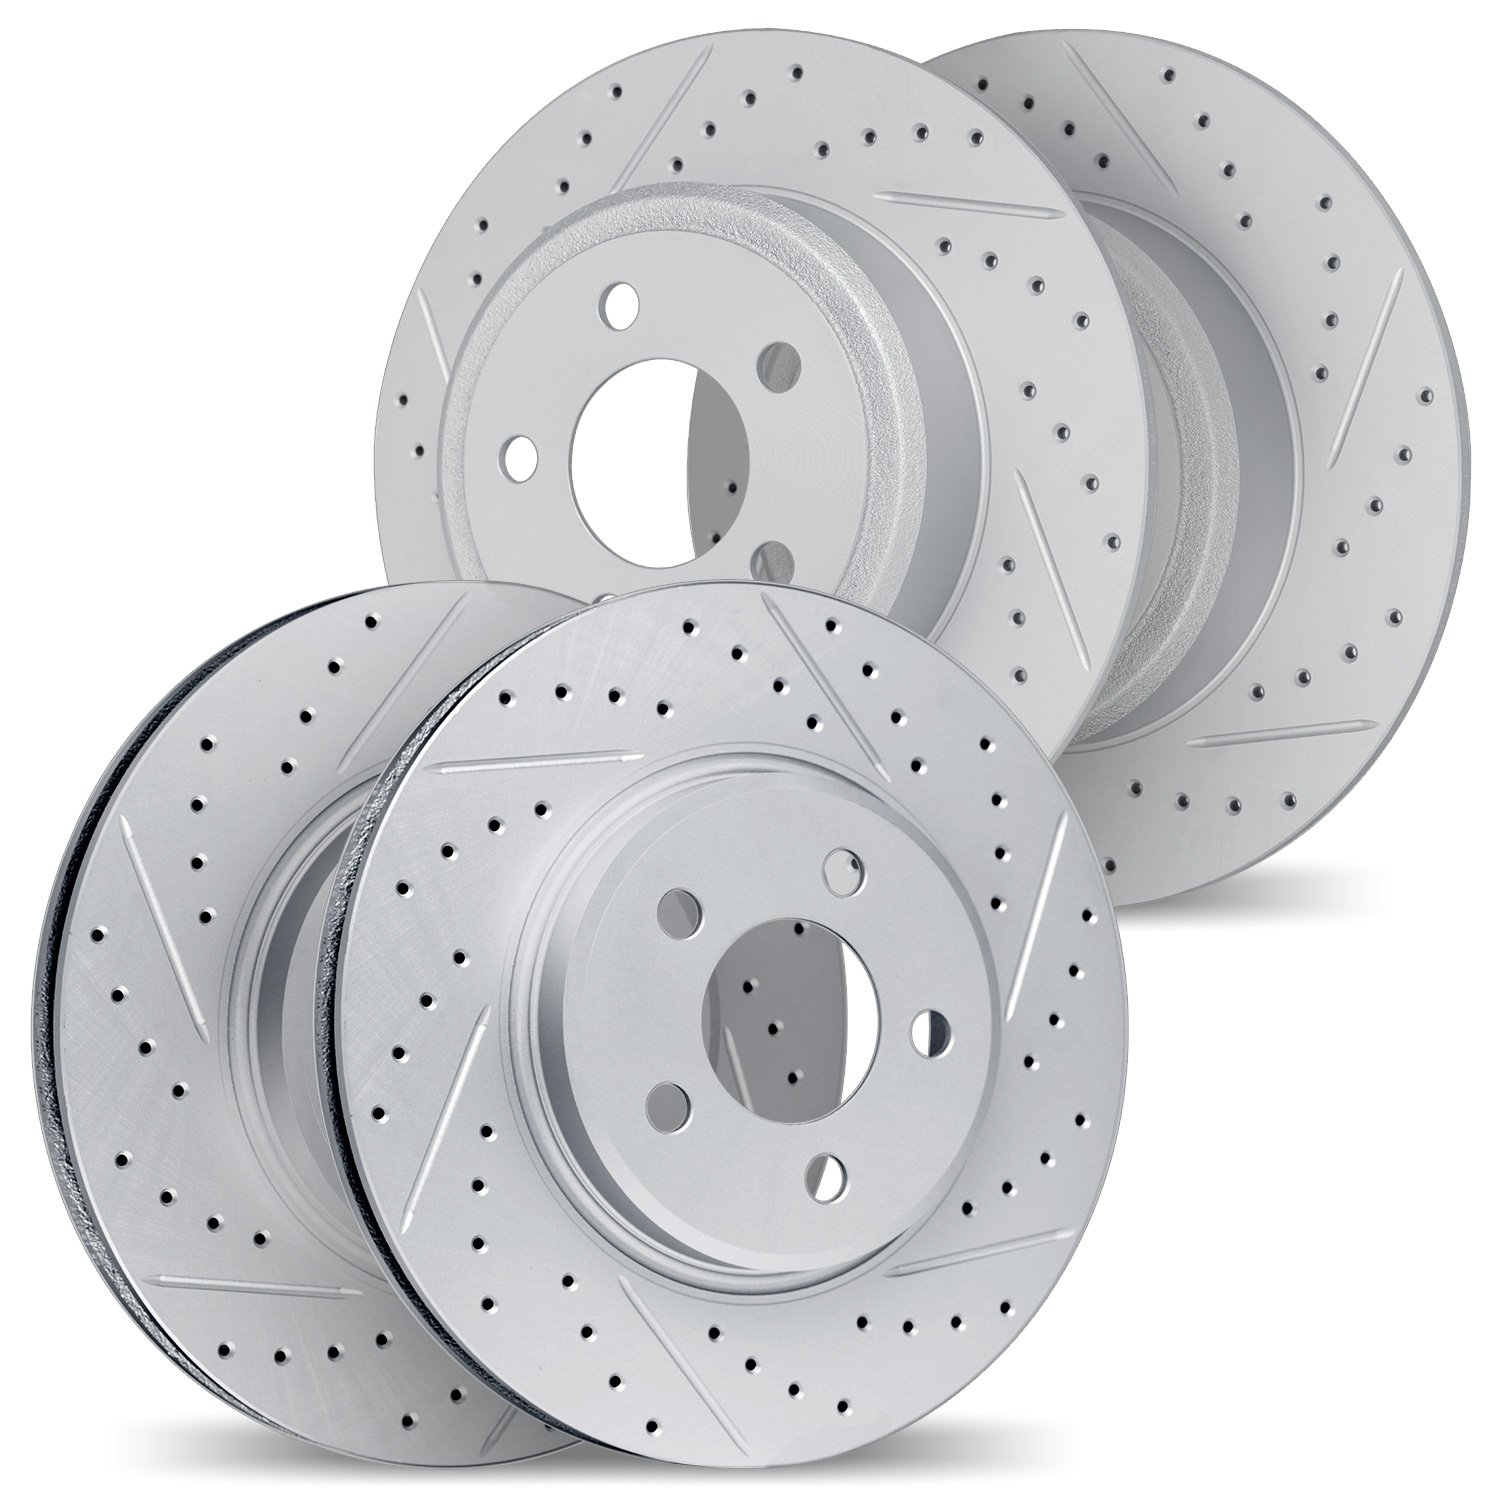 2004-74009 Geoperformance Drilled/Slotted Brake Rotors, 2000-2006 Audi/Volkswagen, Position: Front and Rear